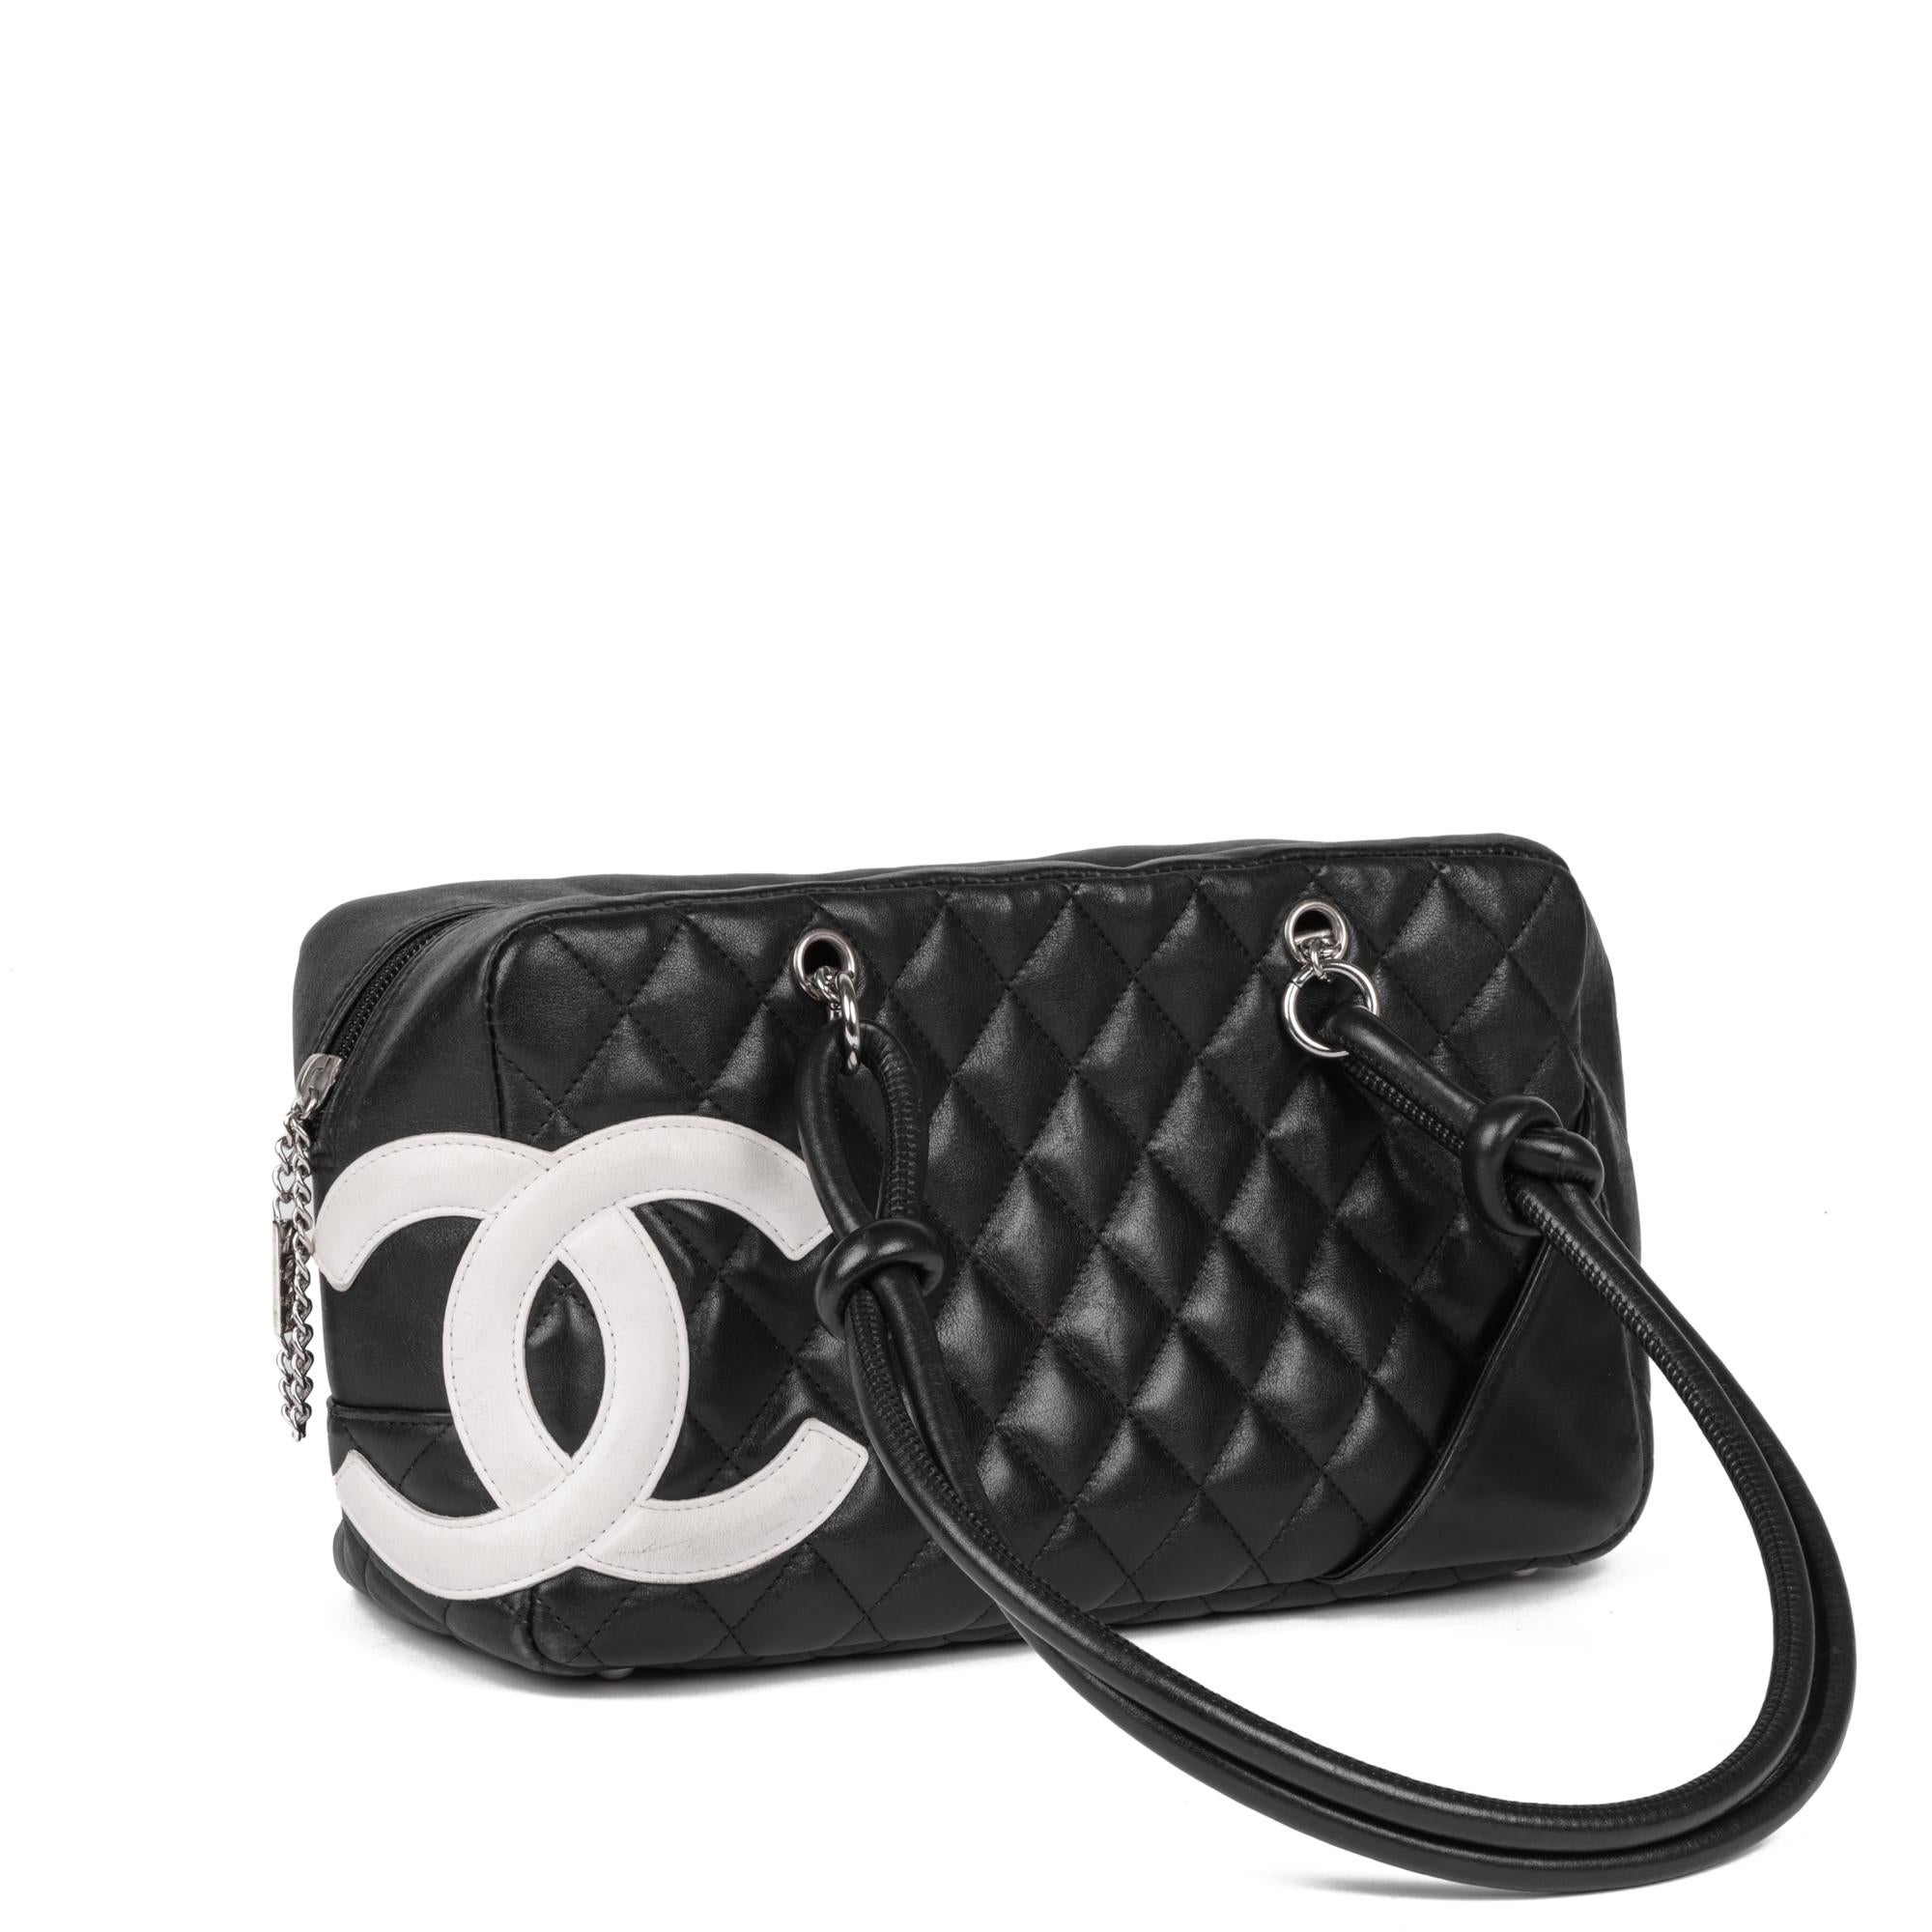 CHANEL
Black and White Quilted Lambskin Large Cambon Bowling Bag

Serial Number: 10391492
Age (Circa): 2005
Accompanied By: Chanel Care Booklet, Authenticity Card
Authenticity Details: Authenticity Card, Serial Sticker (Made in France)
Gender: